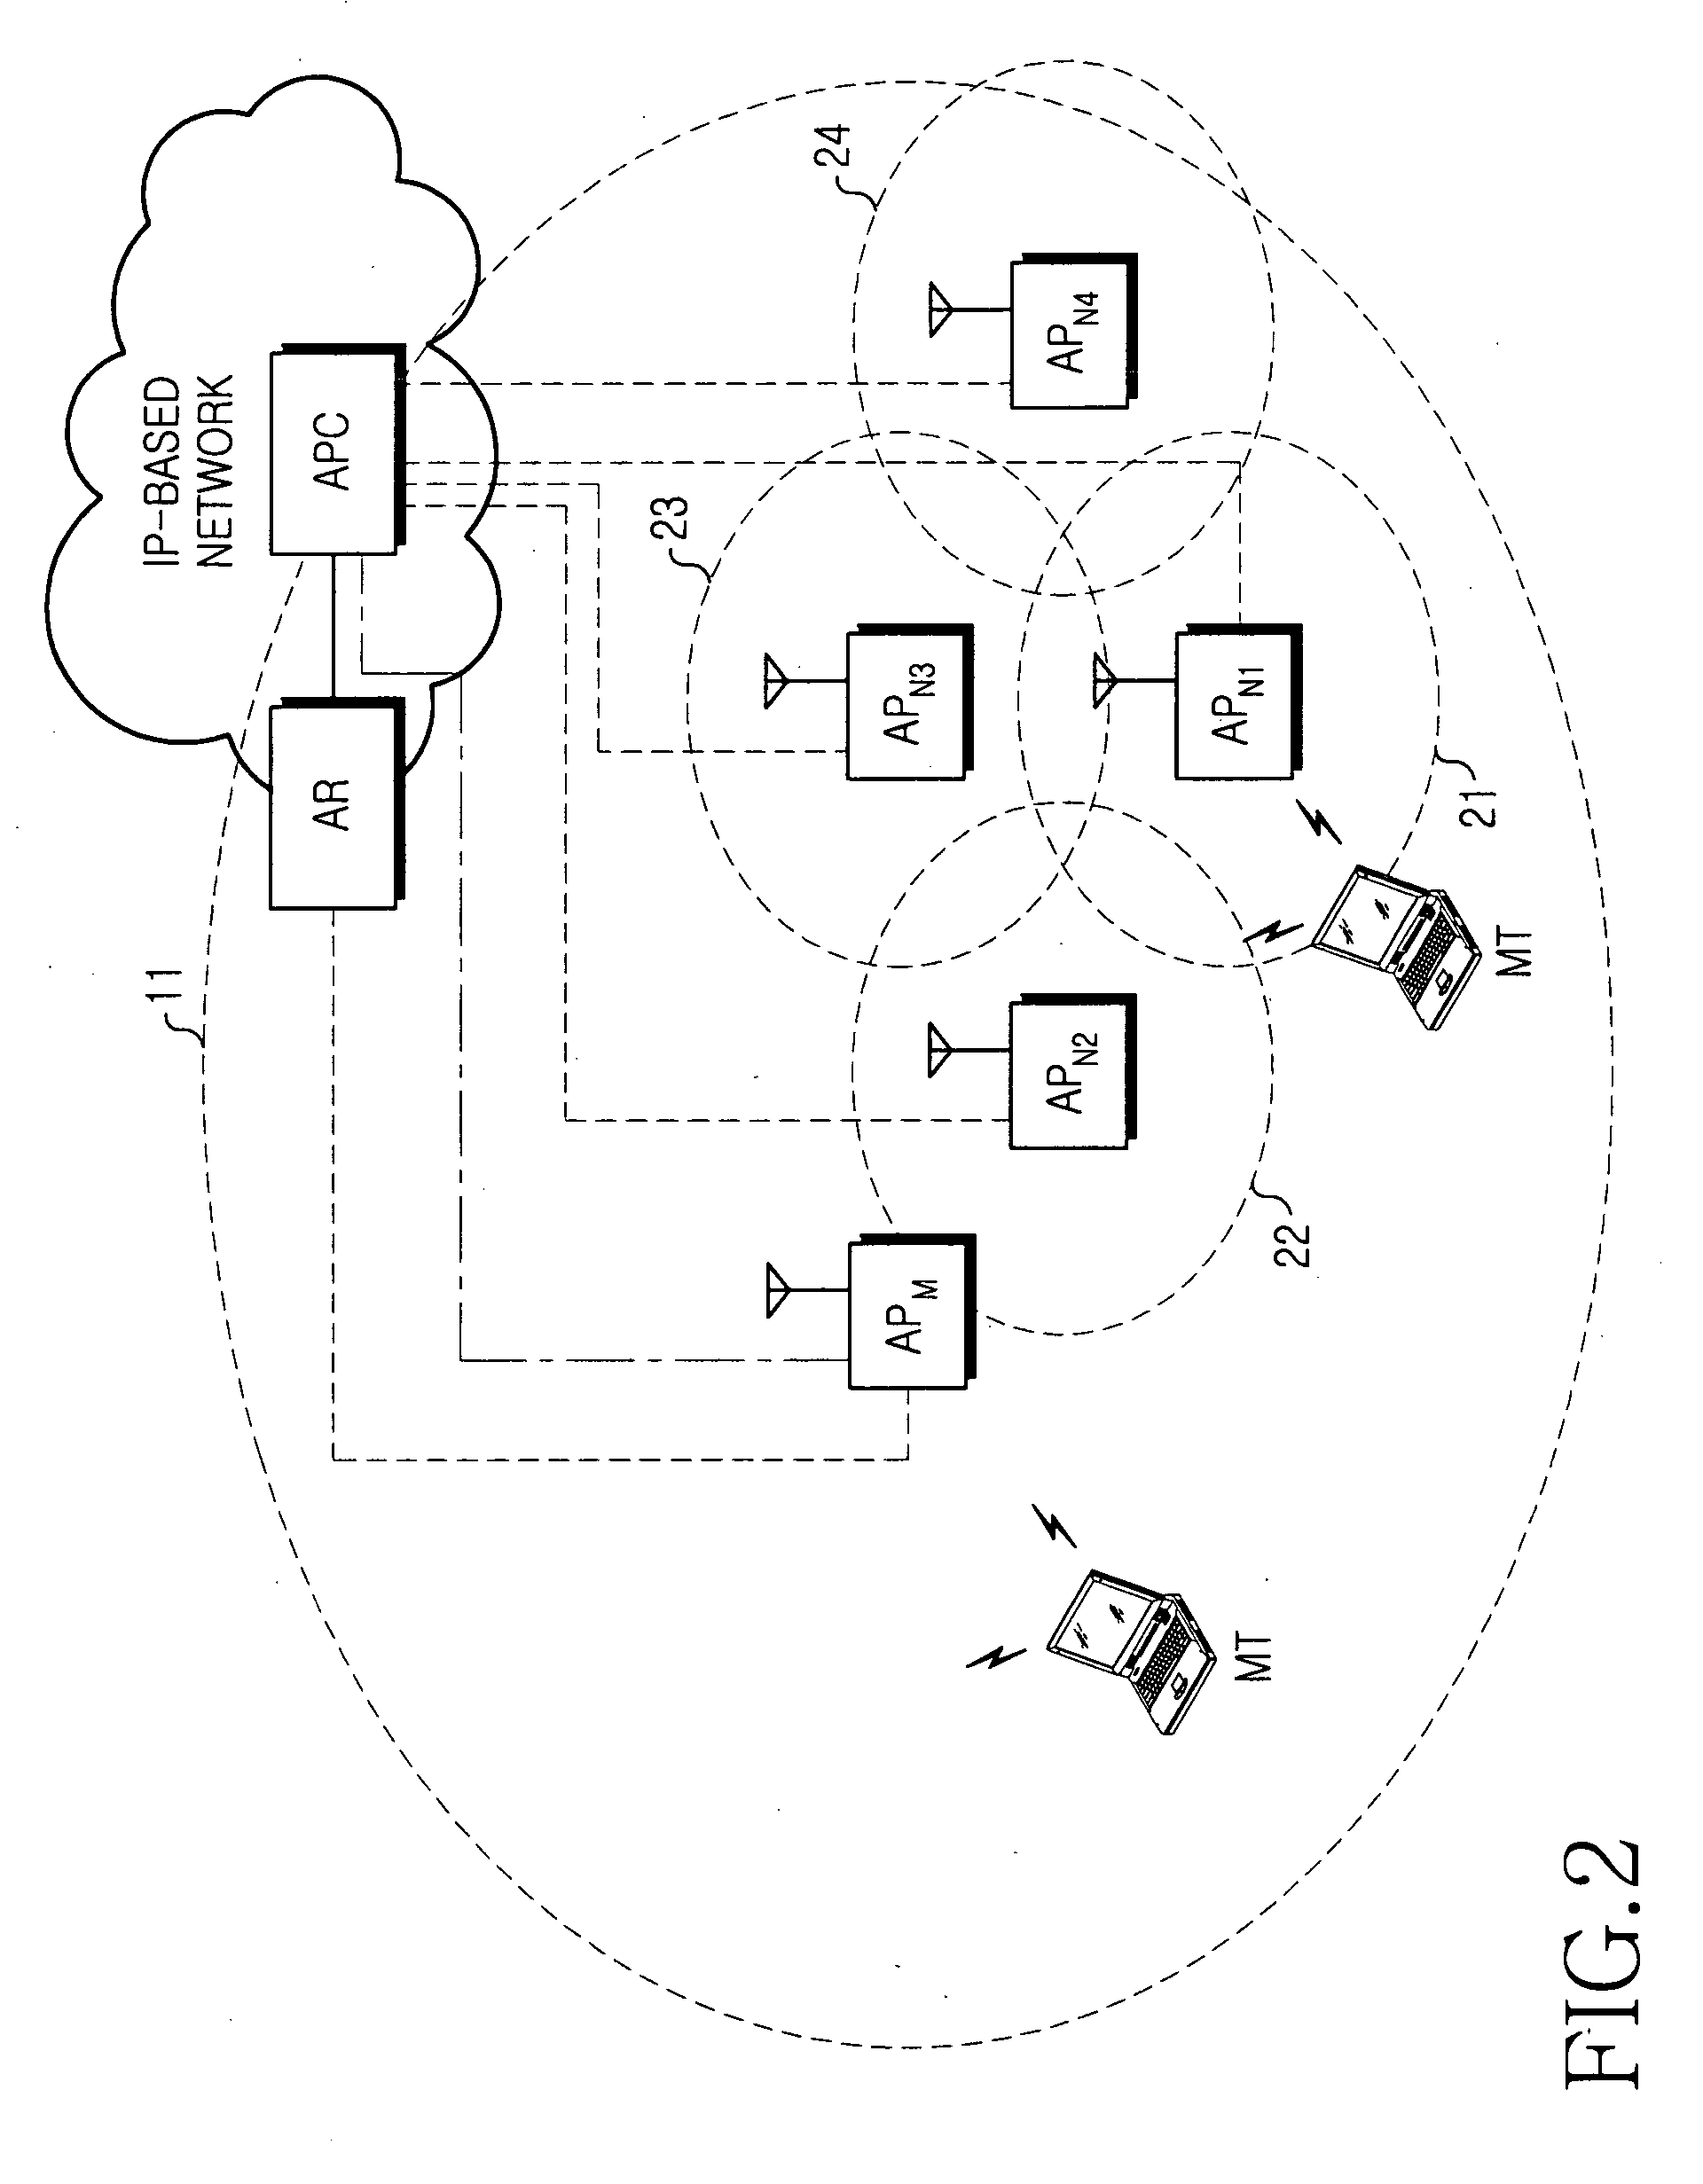 Method for determining a time for performing a vertical hand-off among IP-based heterogeneous wireless access networks